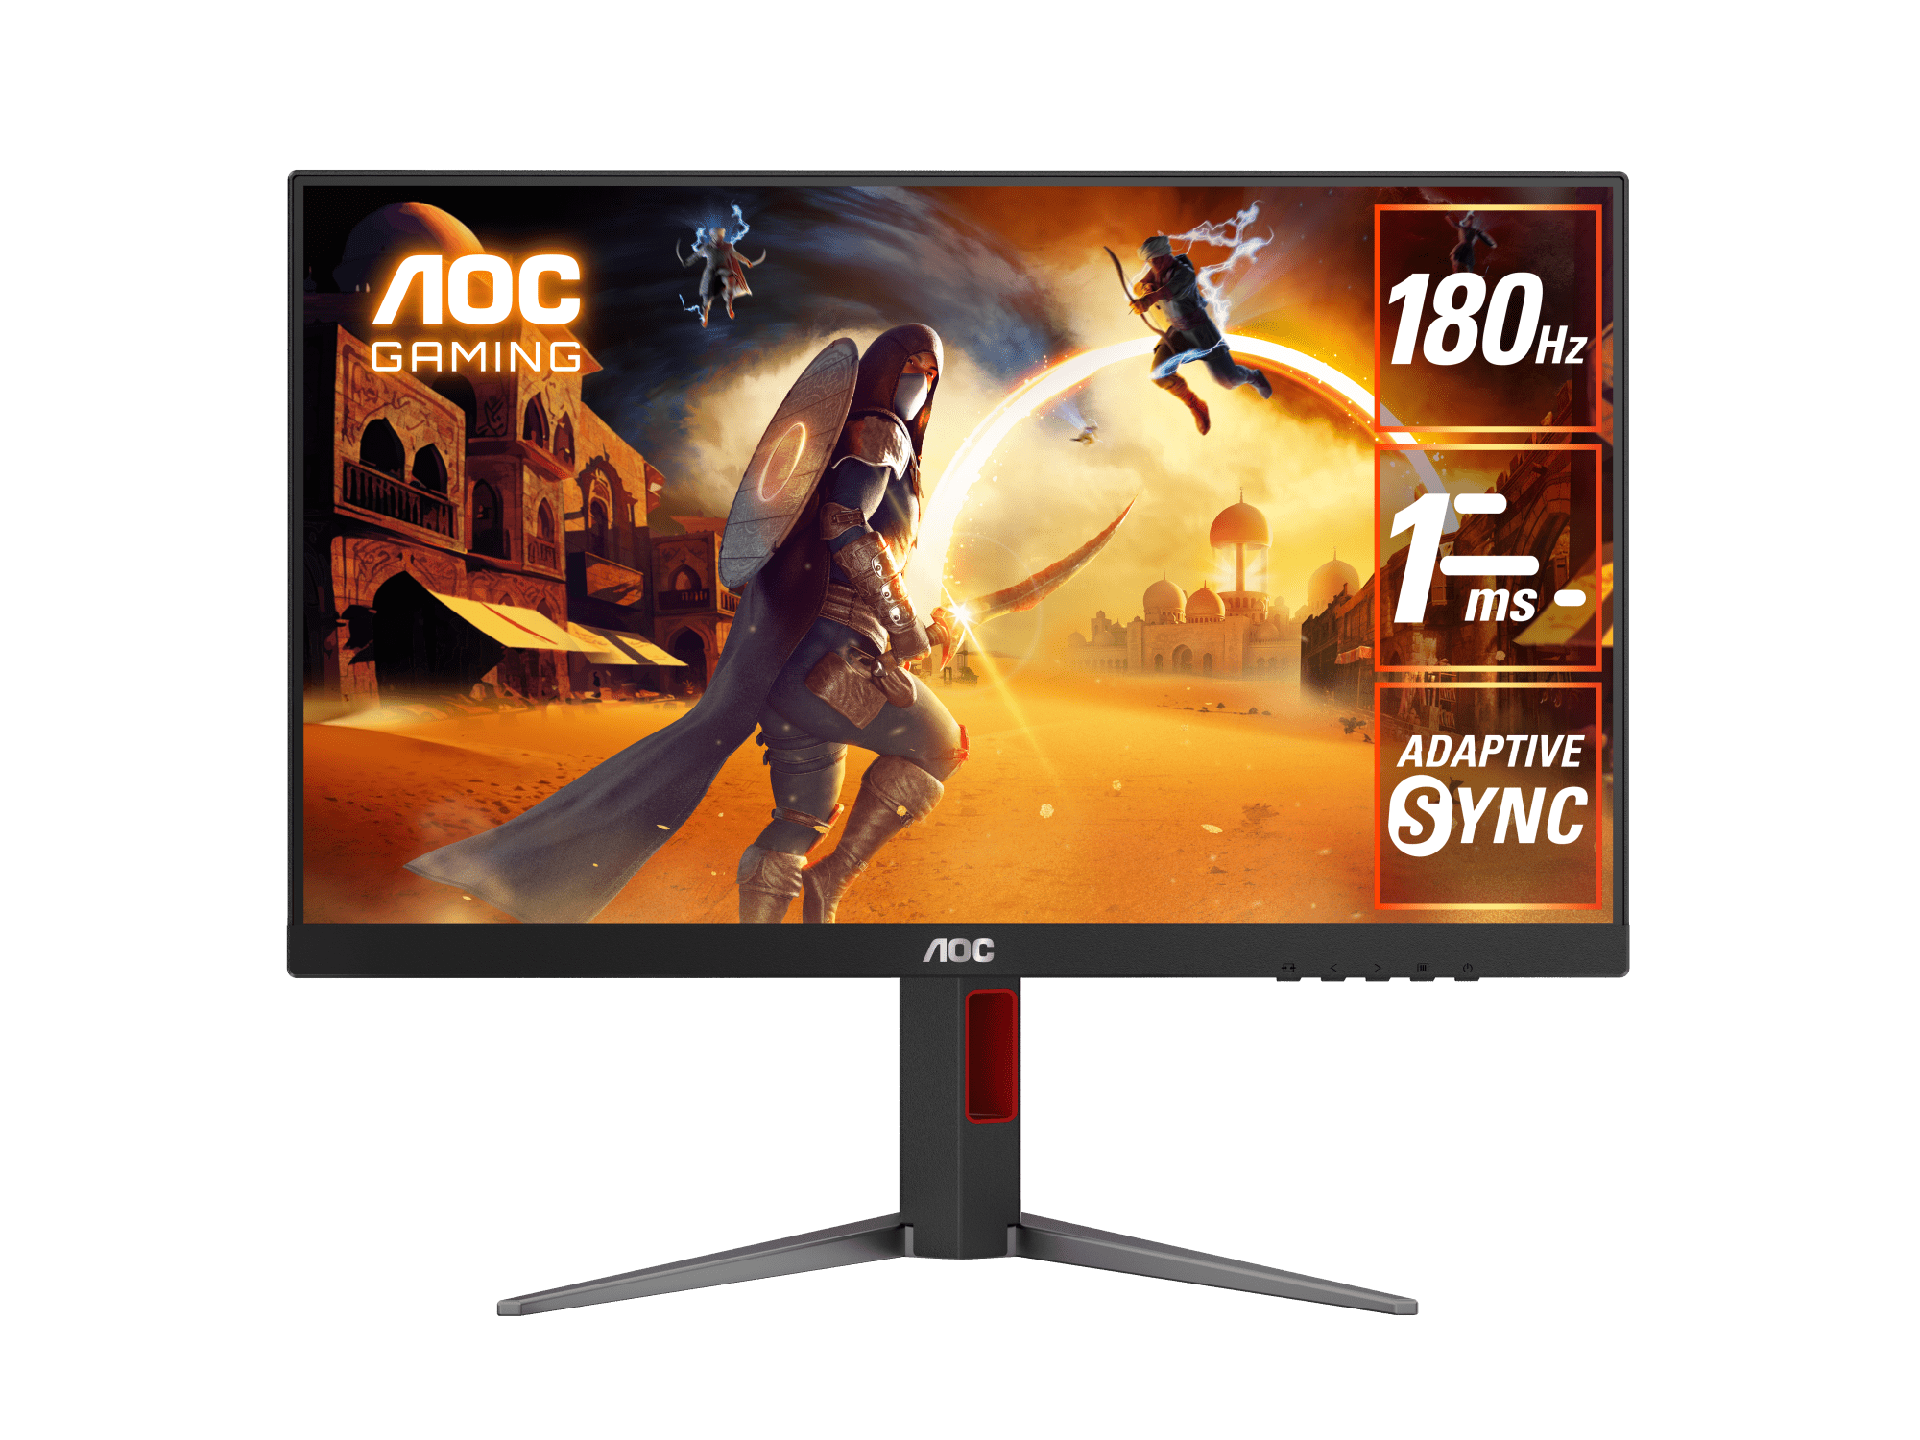 AOC 27G4 27" Fast IPS, 1920 × 1080 (FHD), 180Hz, 1ms, Adaptive Sync, HDR10, IPS Gaming Monitor